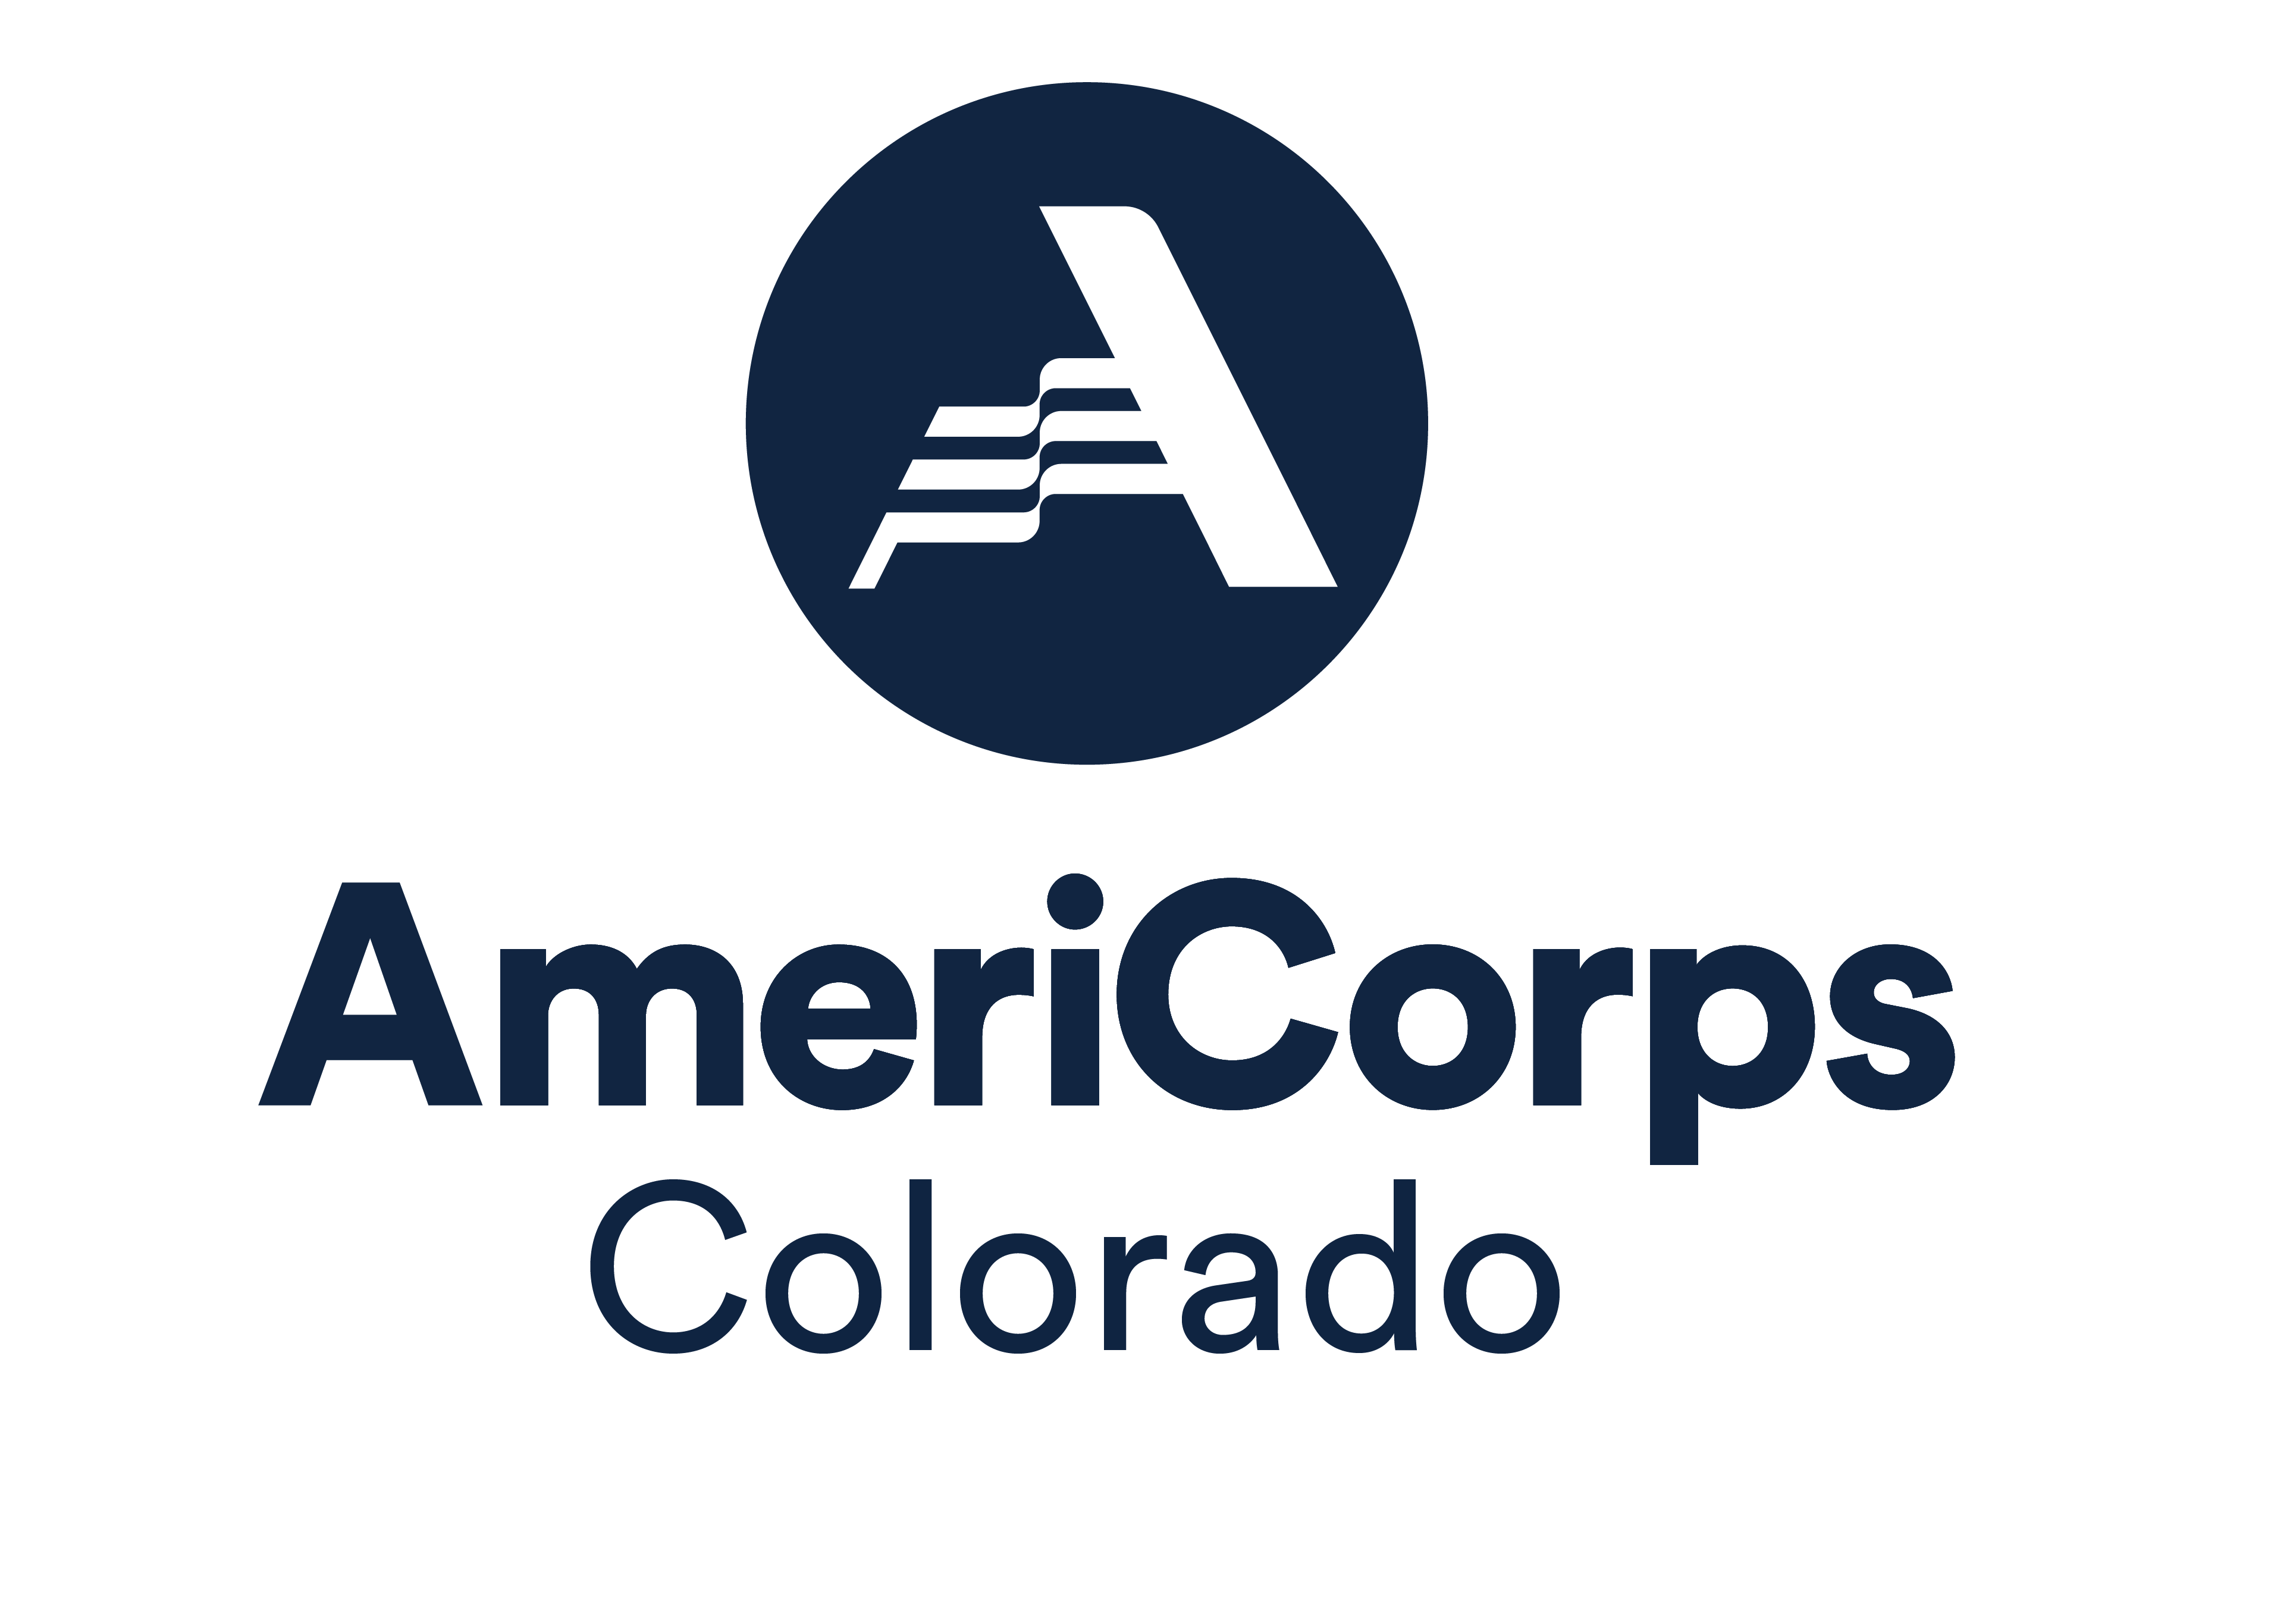 This is the Americorps Colorado logo